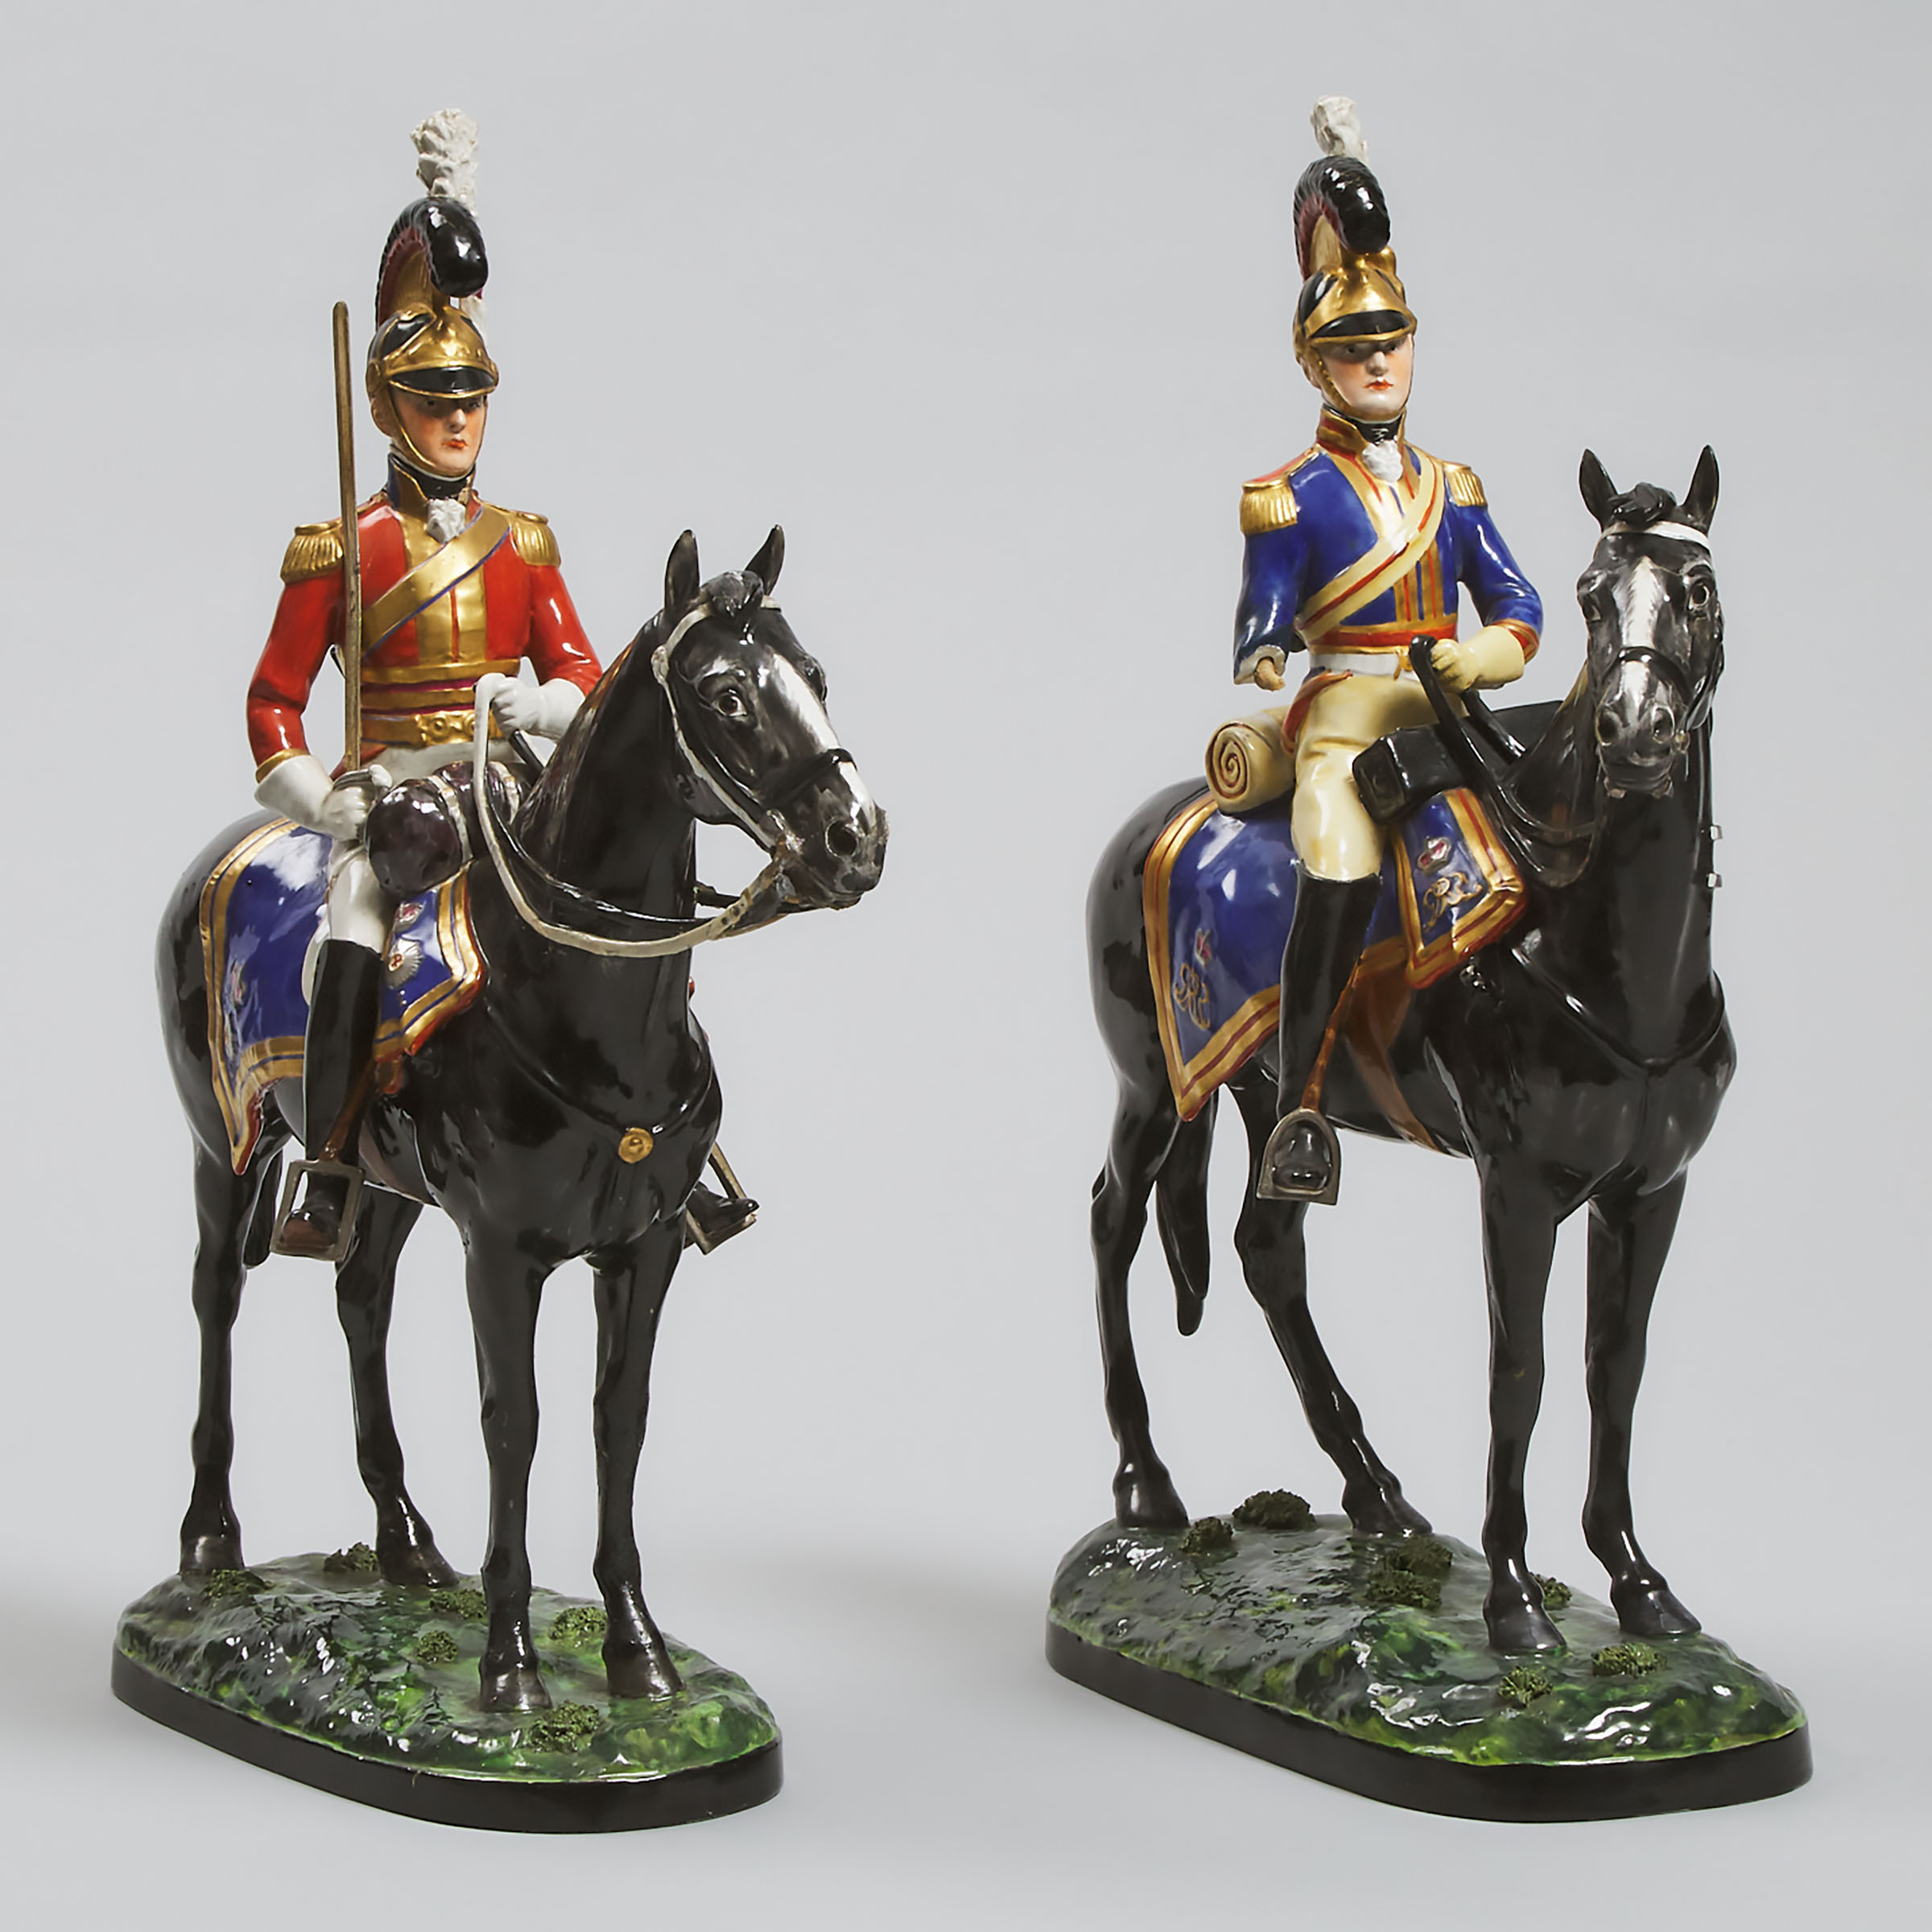 Pair of Copeland Horsemen Figures 'Royal Horse Guards: The Blues' and '2nd Life Guards: Officer', early 20th century